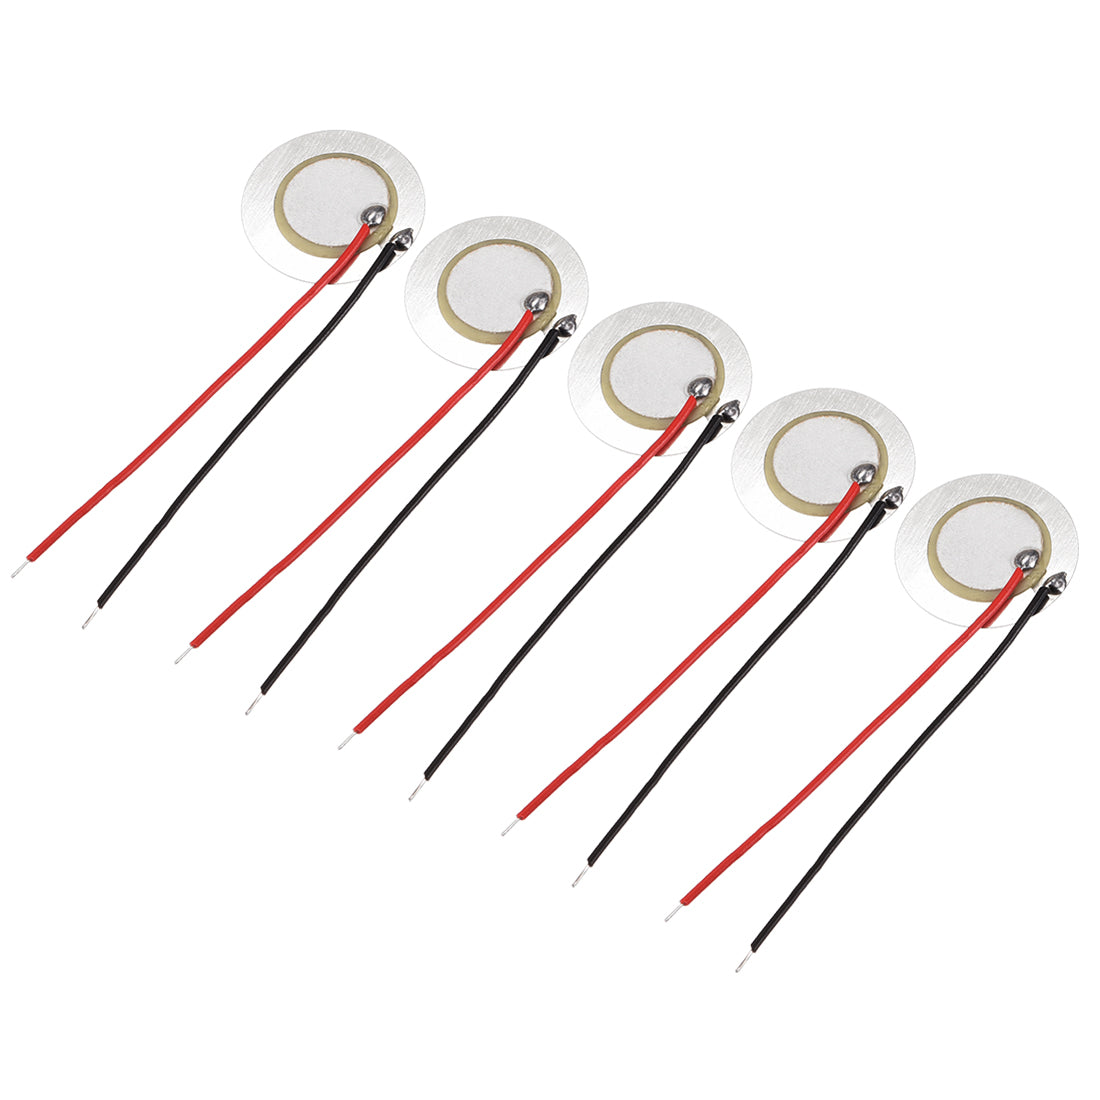 uxcell Uxcell 5 Pcs Piezo Discs 20mm Acoustic Pickup Transducer Prewired Microphone Trigger Drum CBG Guitar